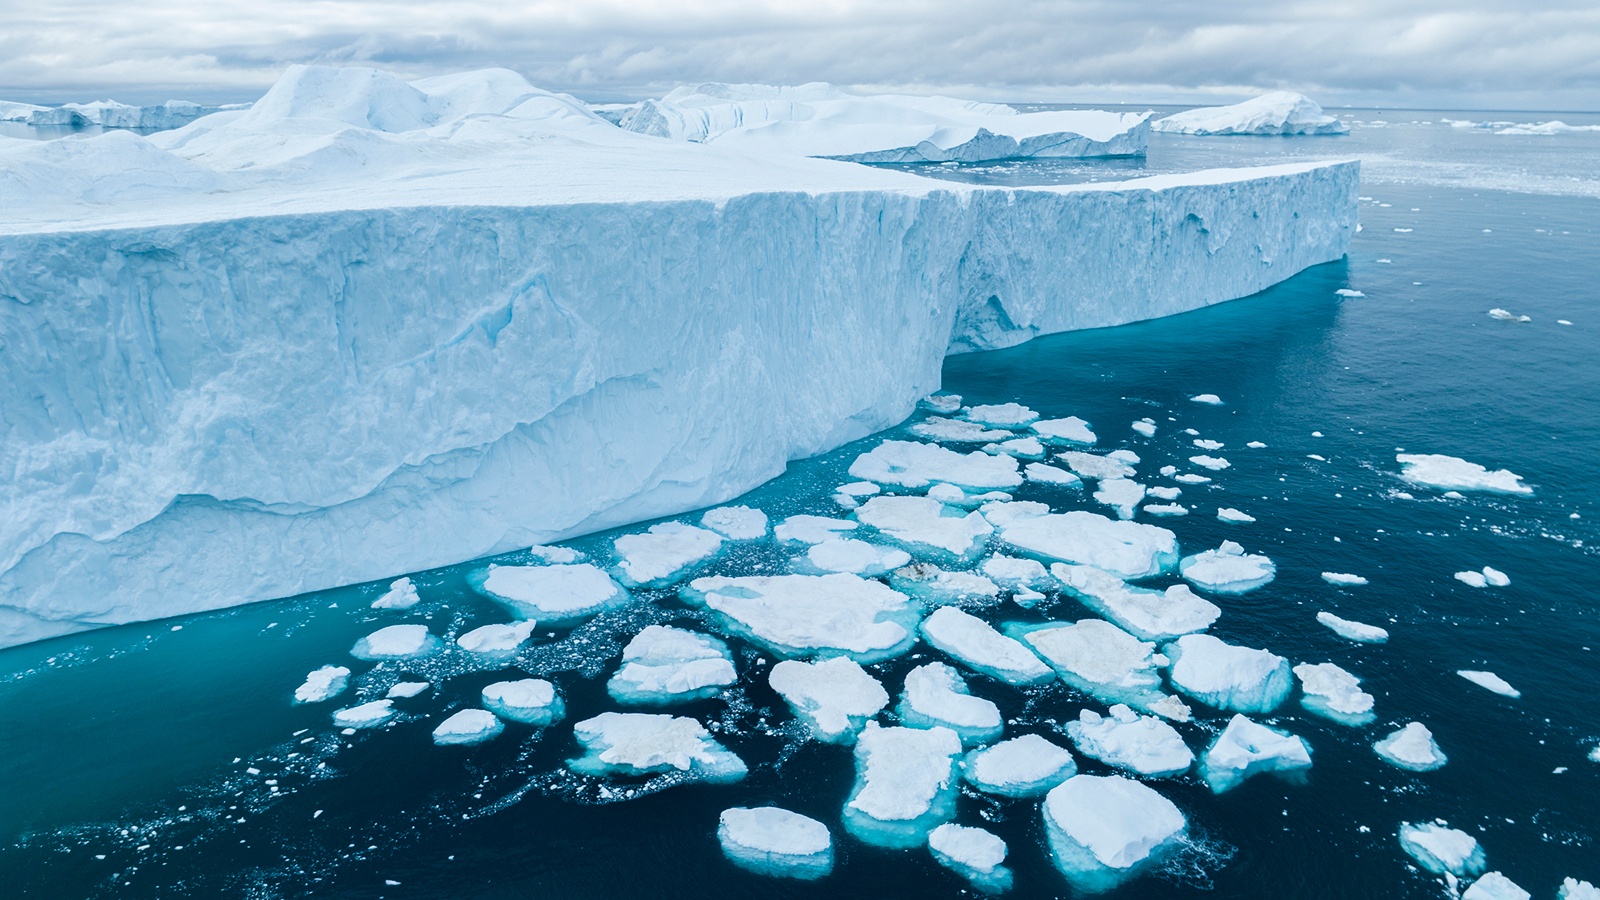 Summertime Arctic ice could be completely depleted within two years